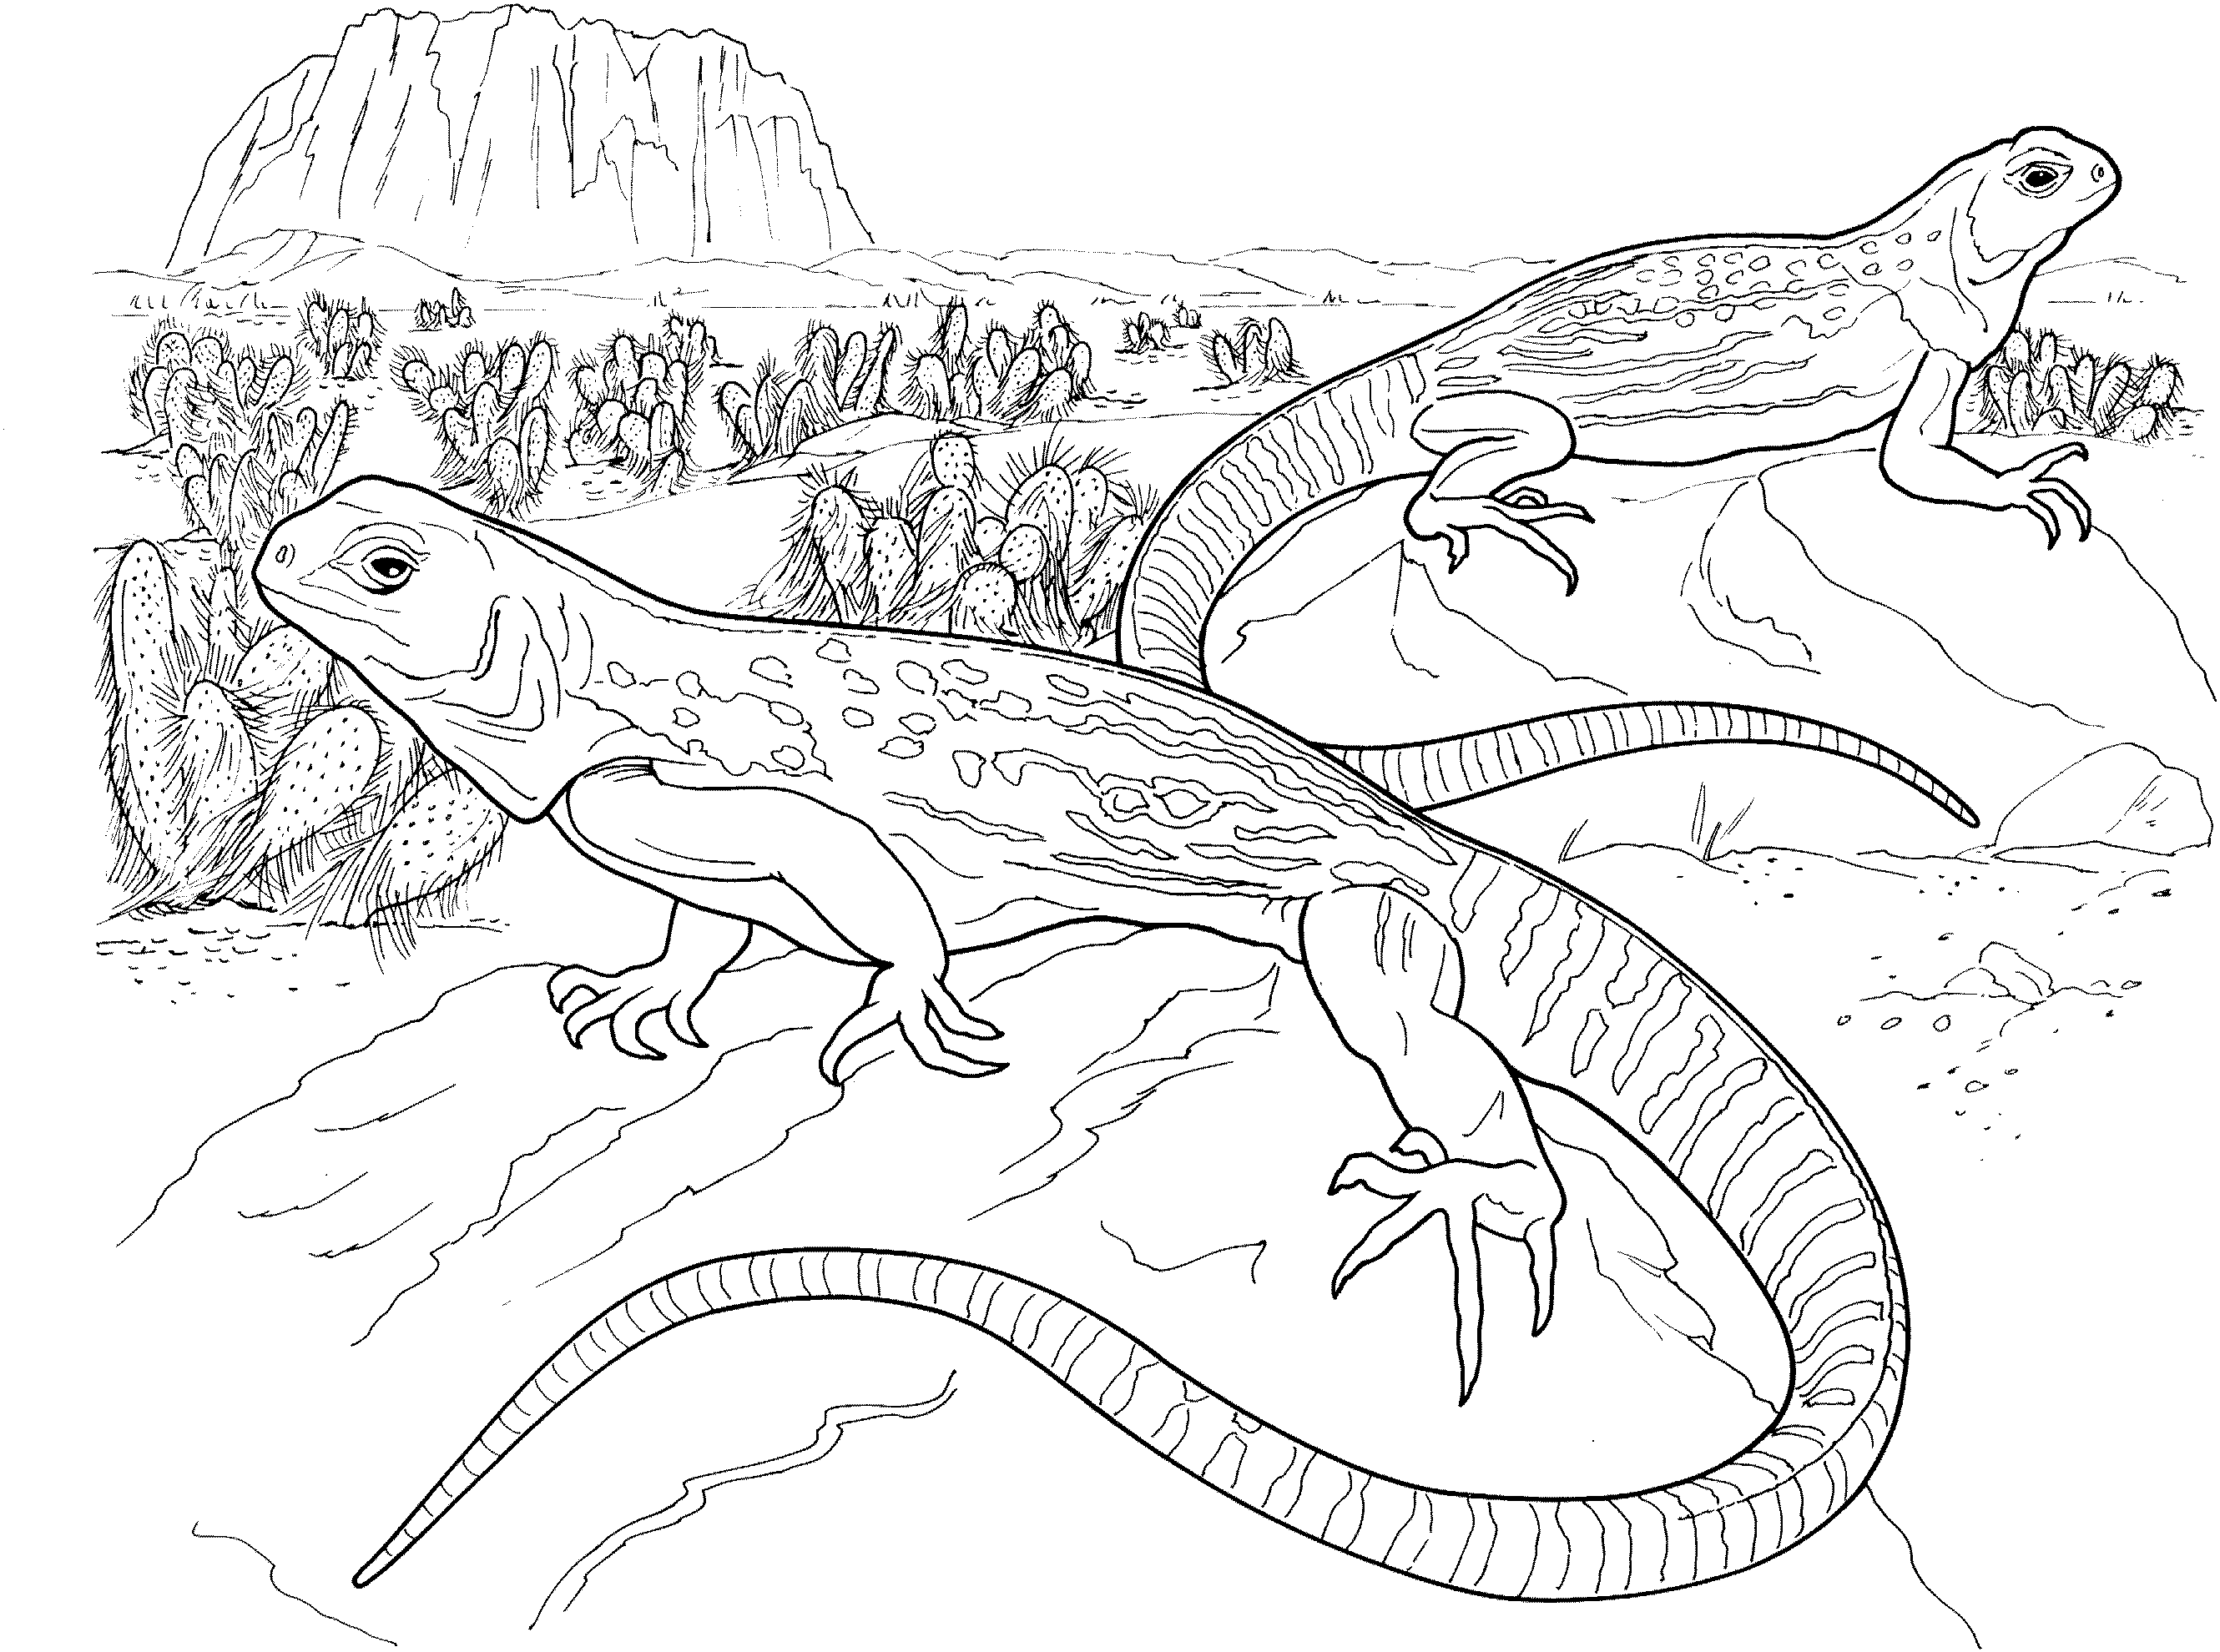 Effortfulg: Reptile Coloring Pages